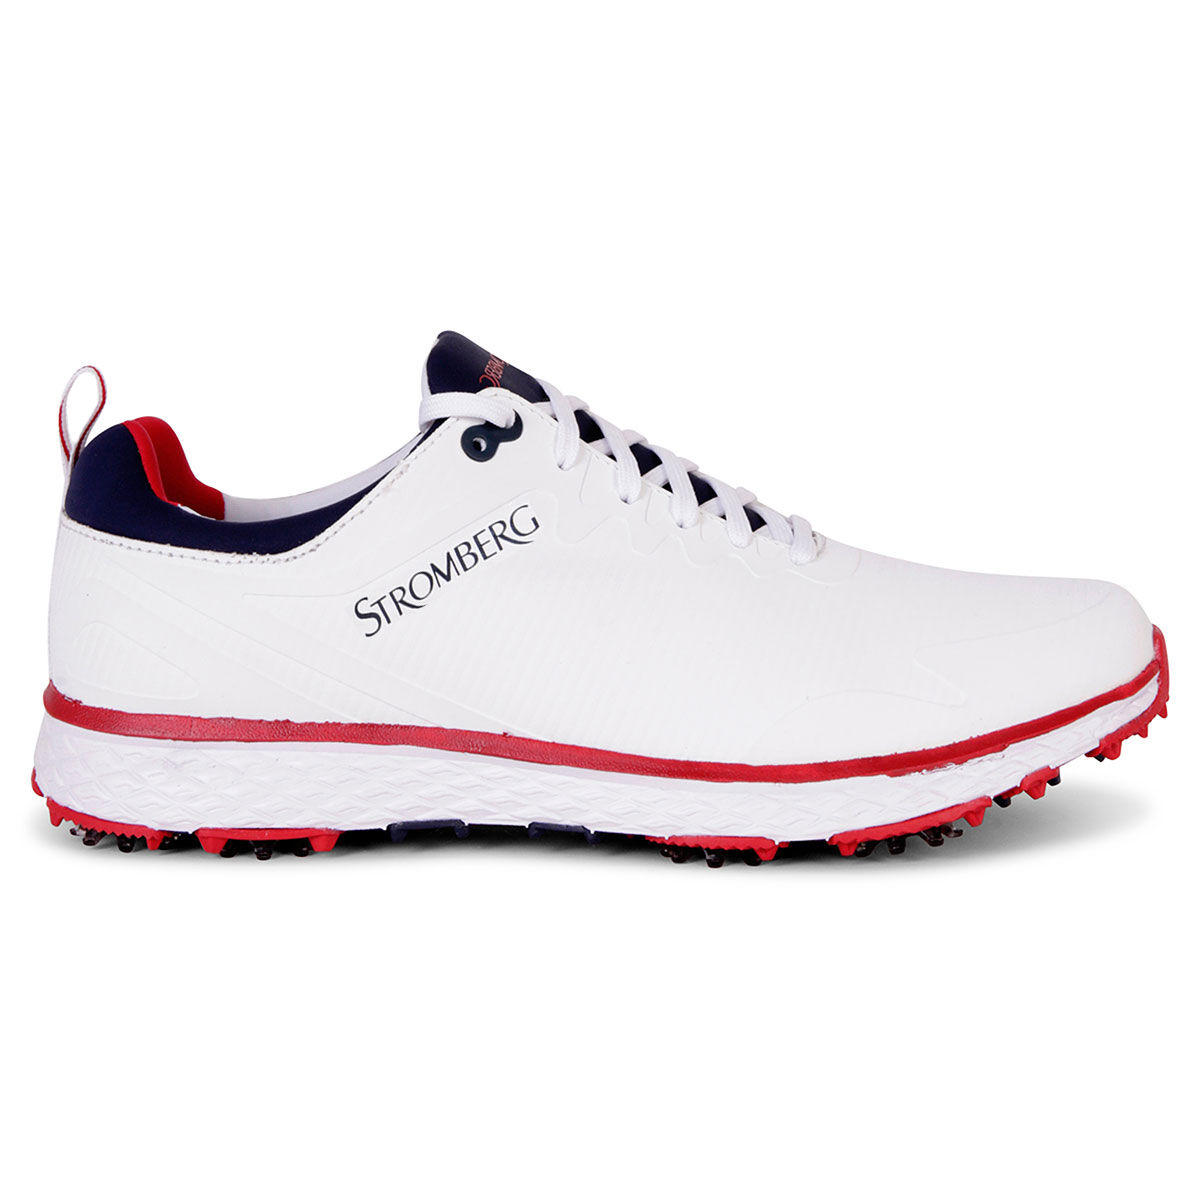 Stromberg Men’s Tempo Waterproof Spiked Golf Shoes, Mens, White/navy/red, 9 | American Golf